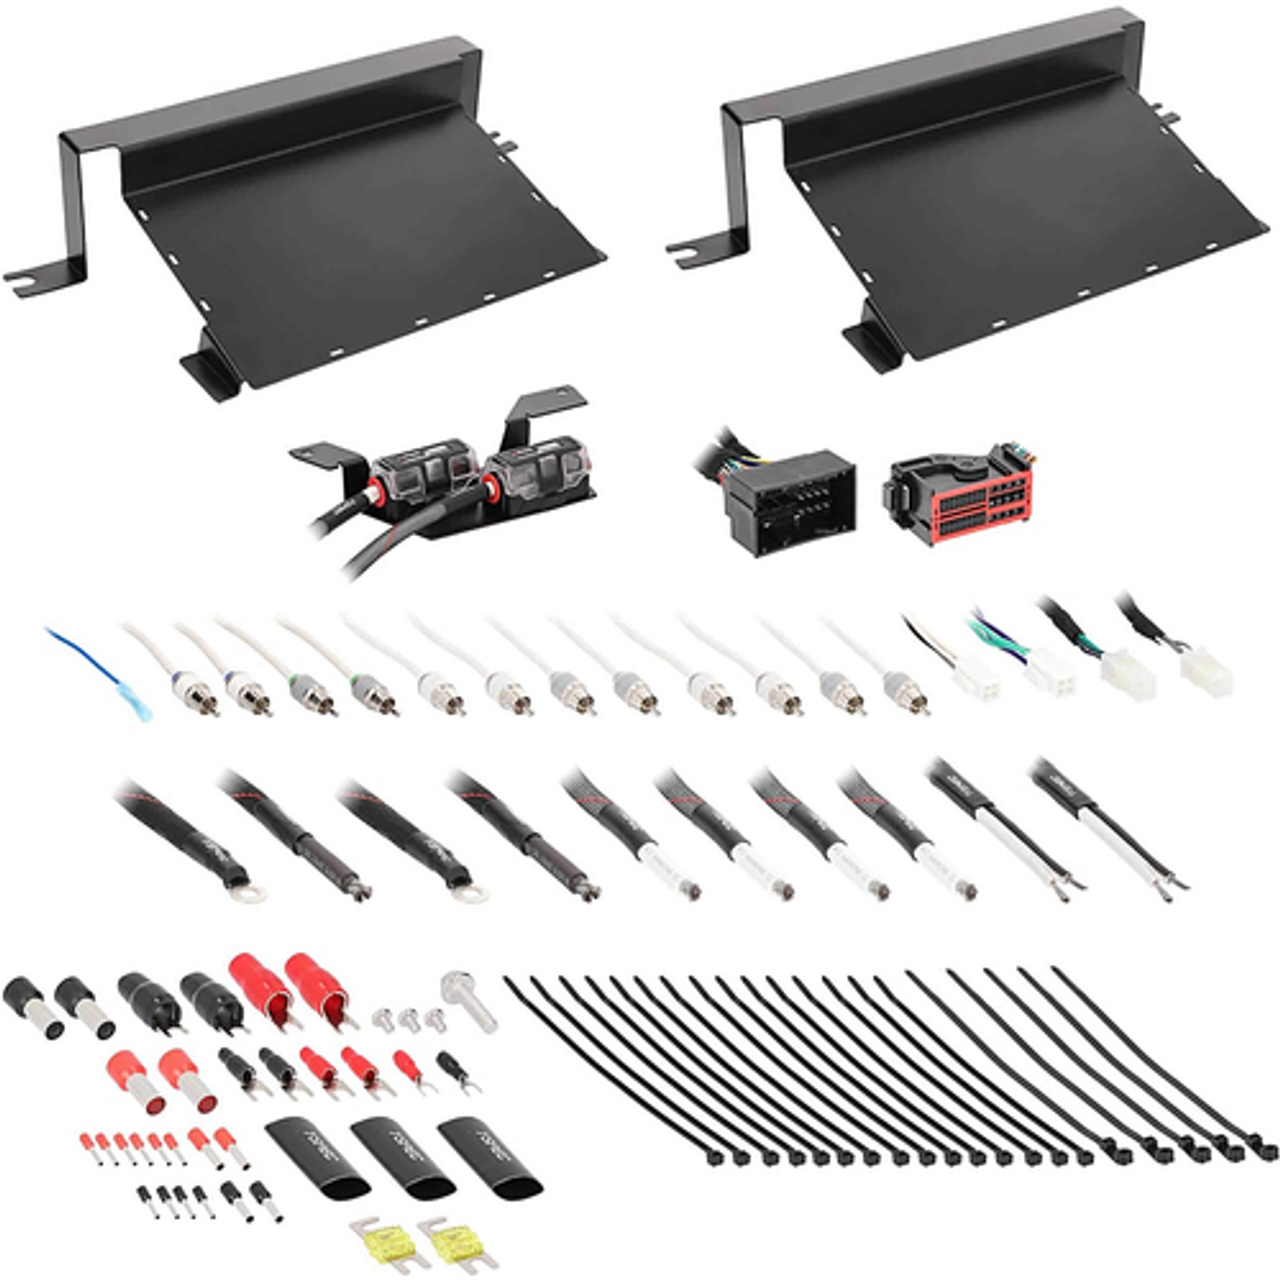 Metra - Dual-Amp Installation Kit for Select Jeep Vehicles - Black